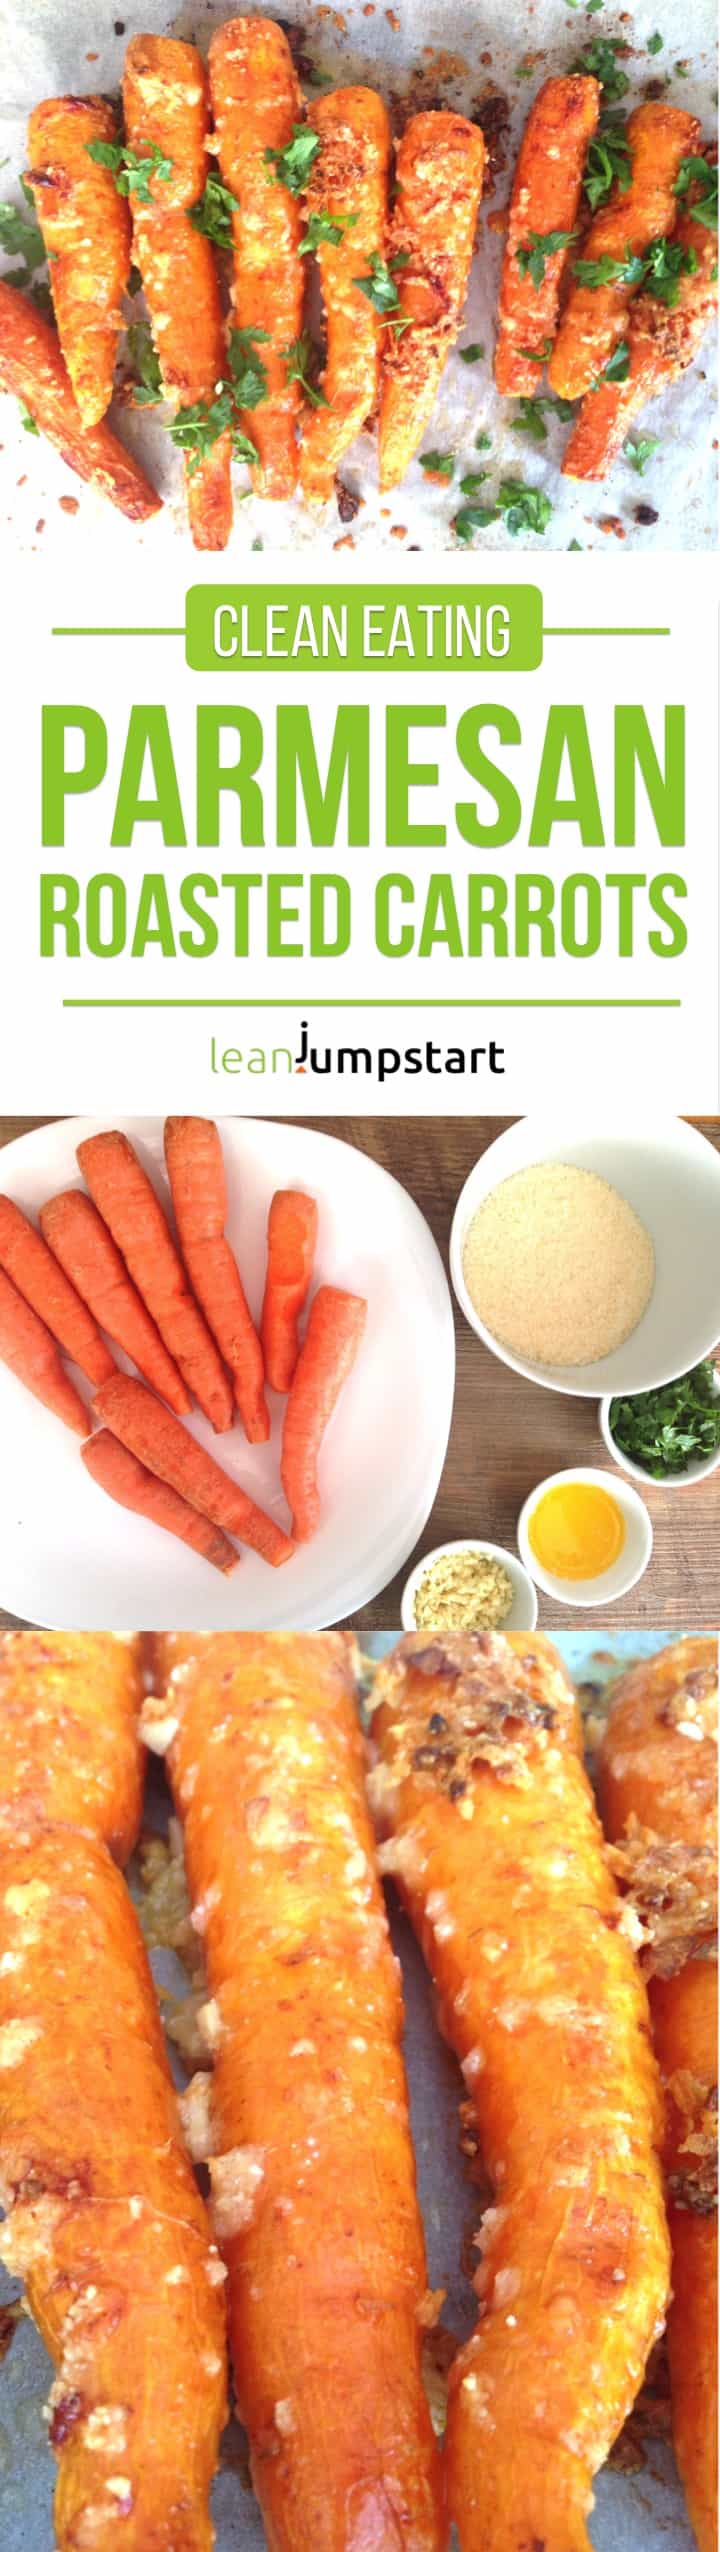 parmesan roasted carrots: a spicy and yummy side dish for weight management